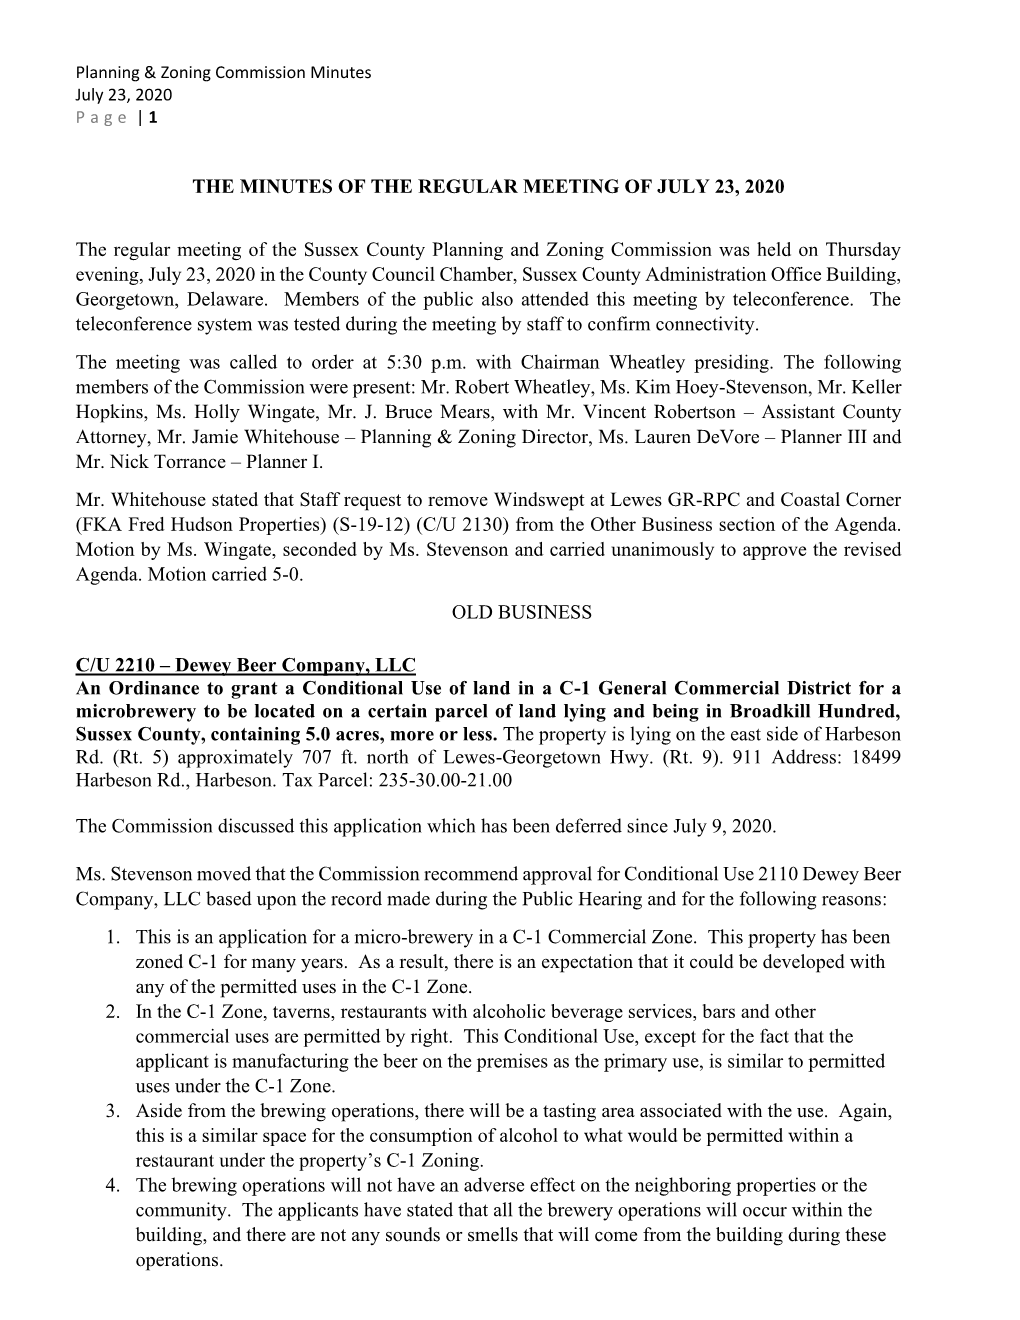 The Minutes of the Regular Meeting of July 23, 2020